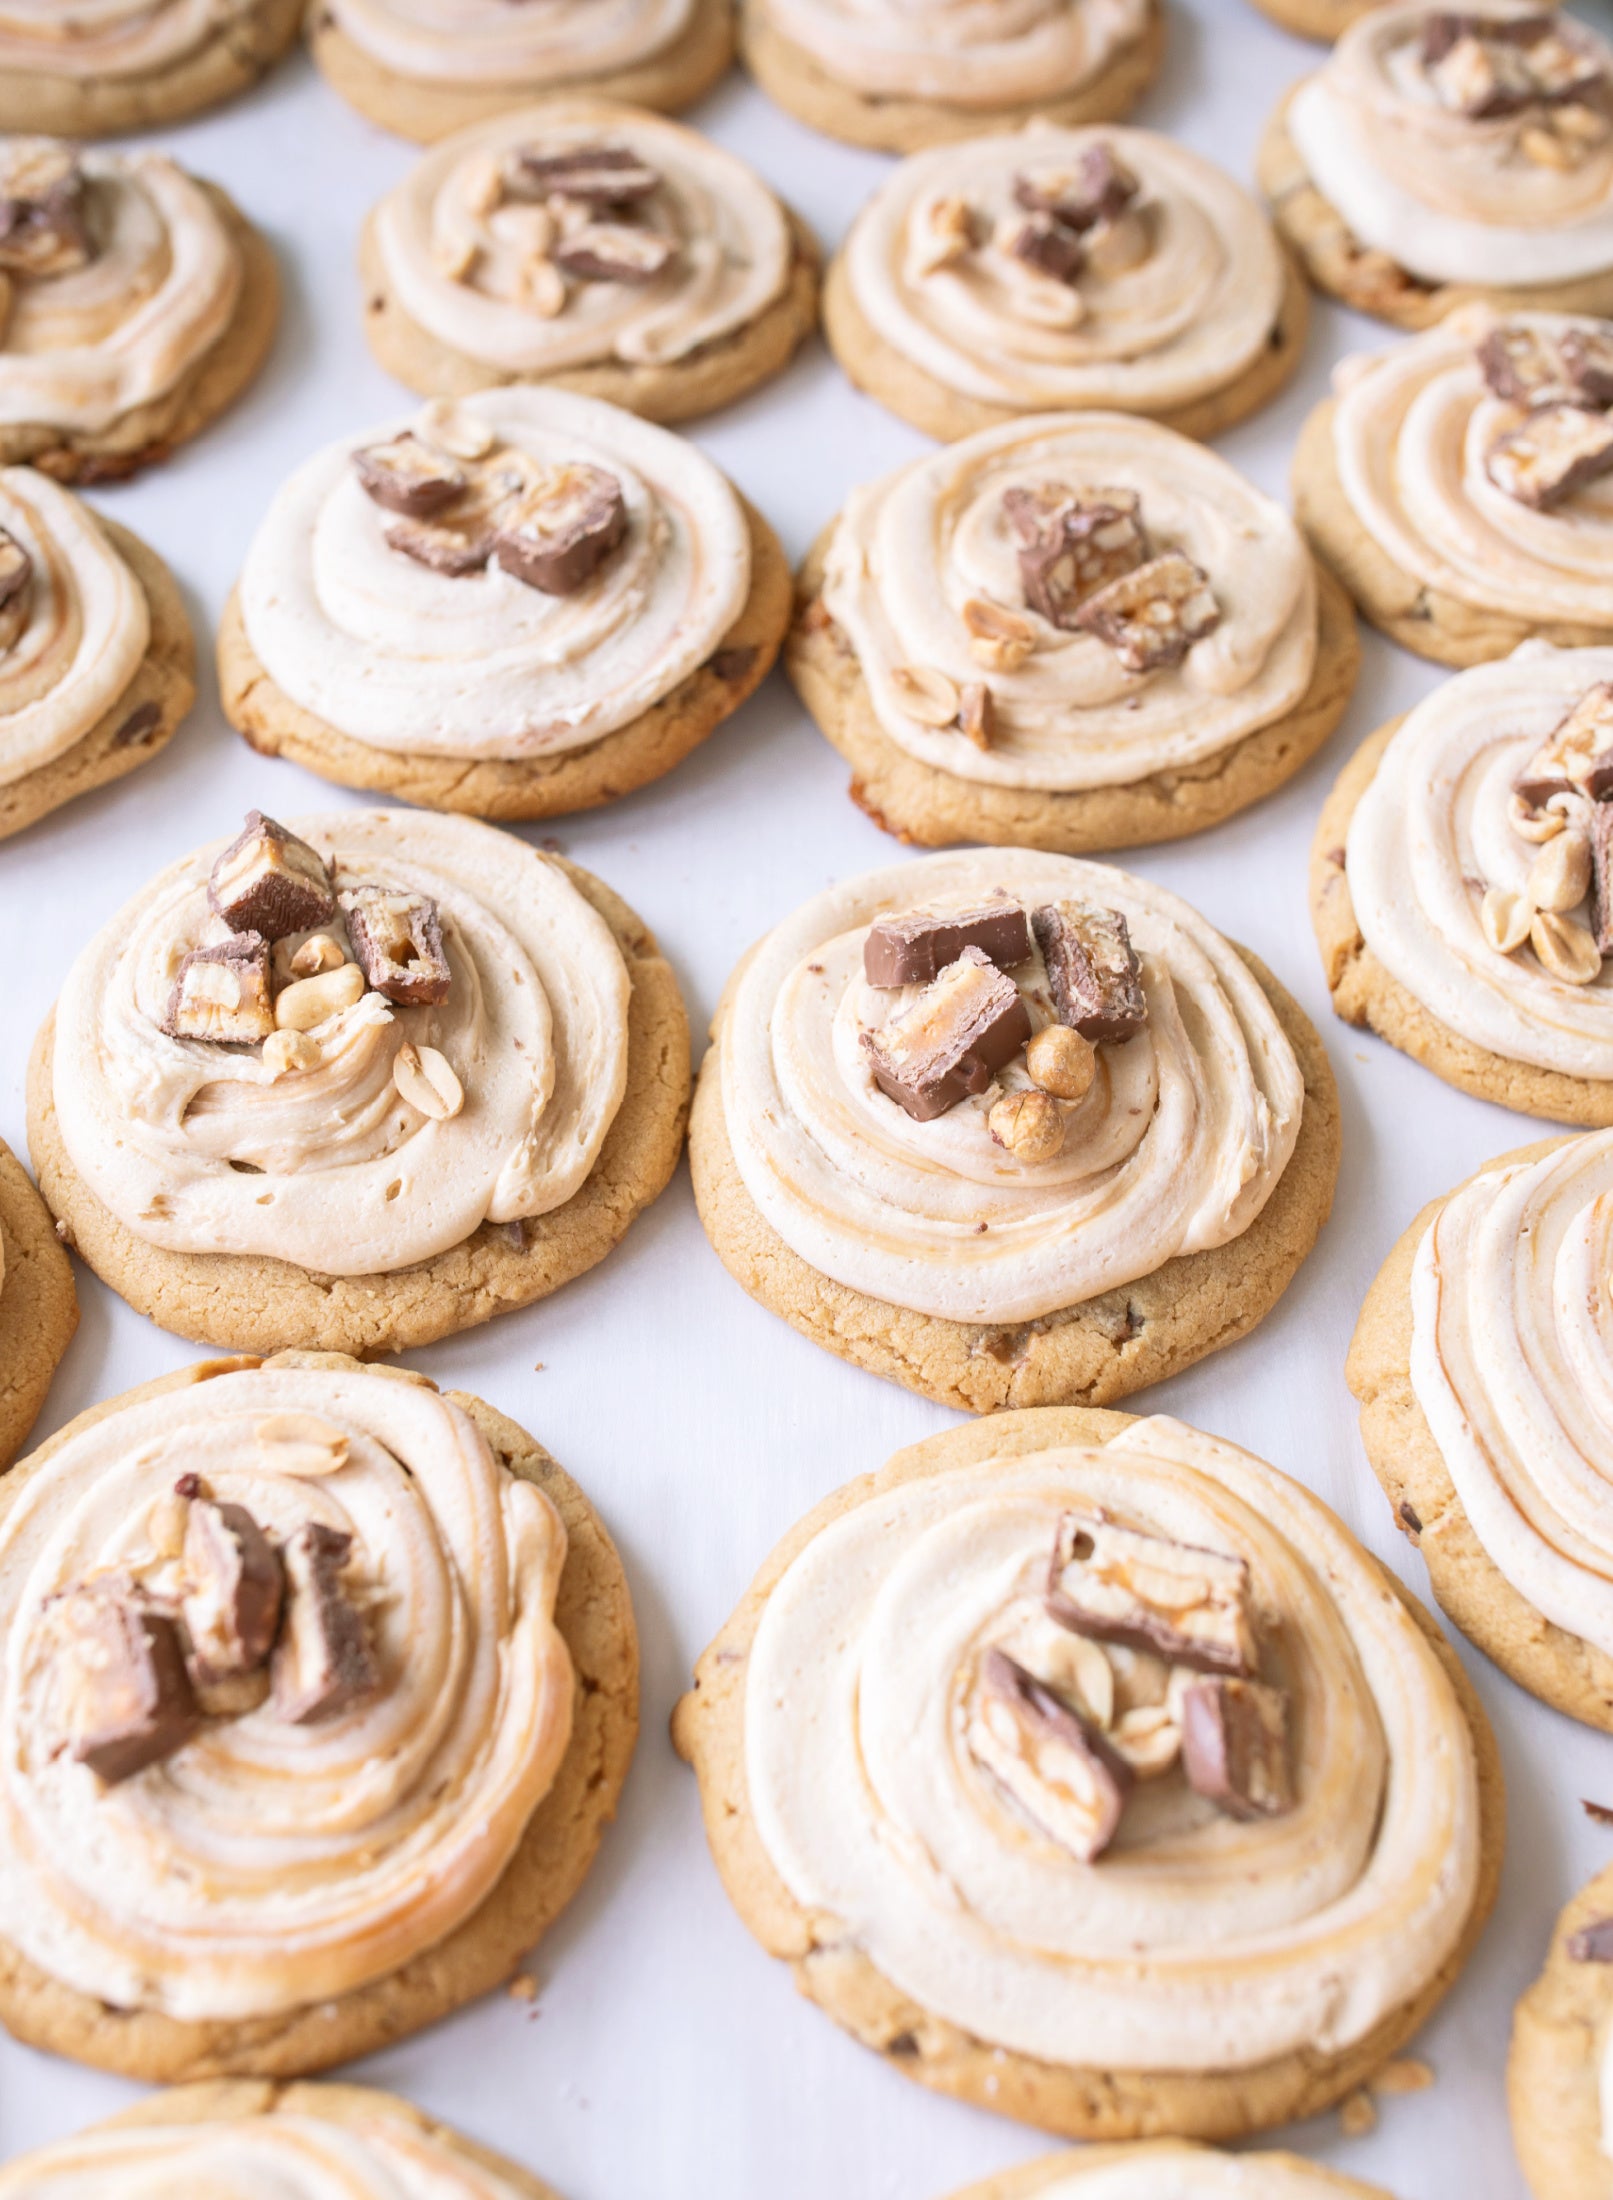 Frosted Peanut Butter Carmel Snickers Cookies